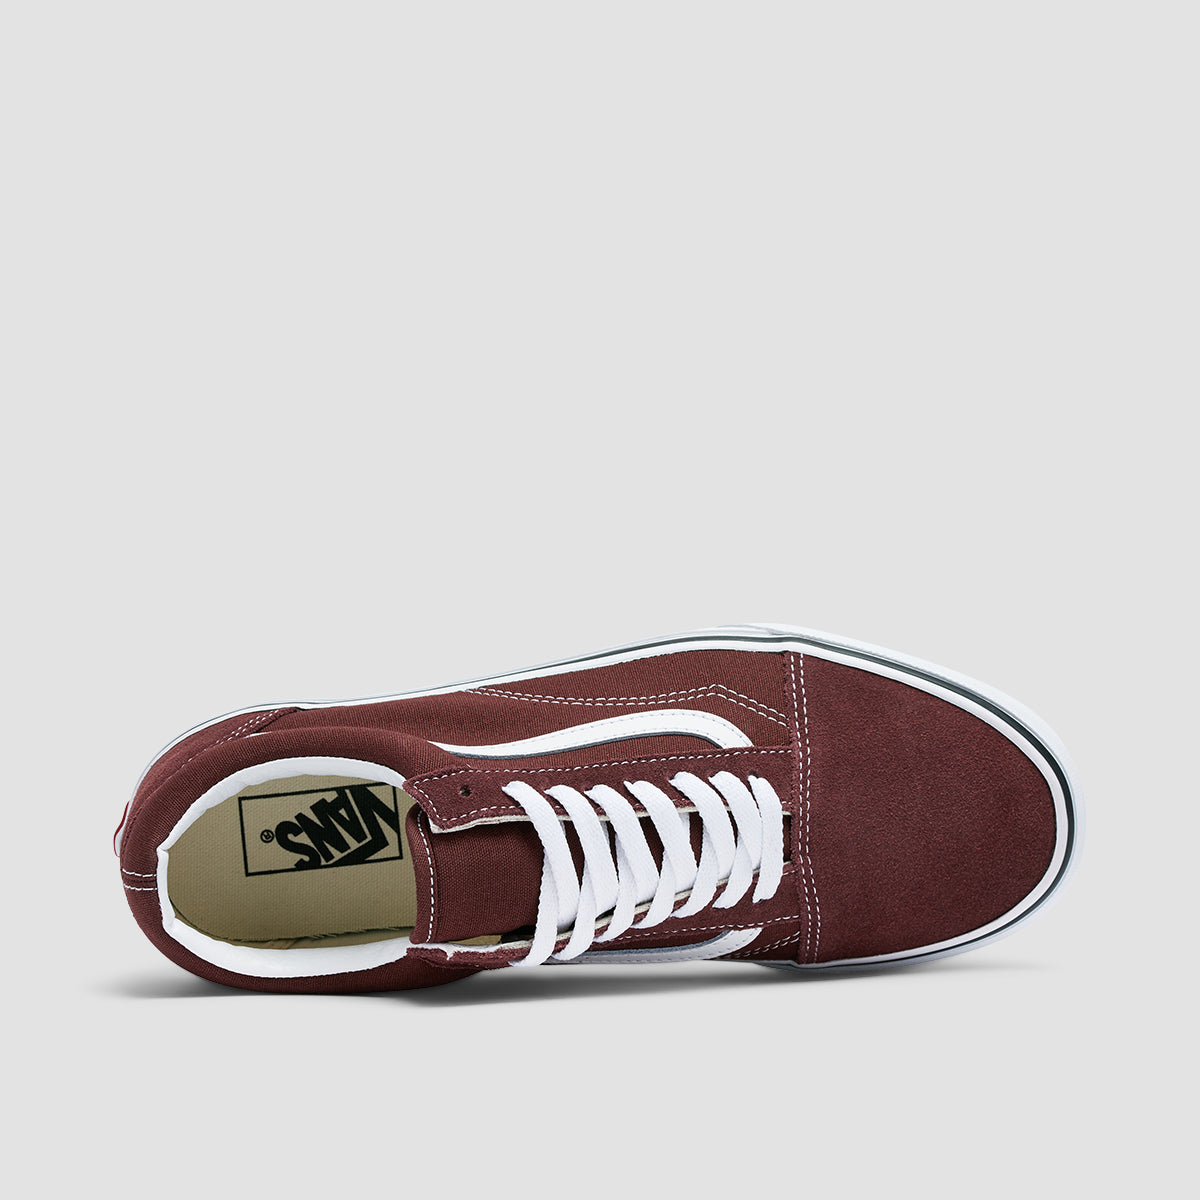 Vans Old Skool Shoes - Colour Theory Bitter Chocolate